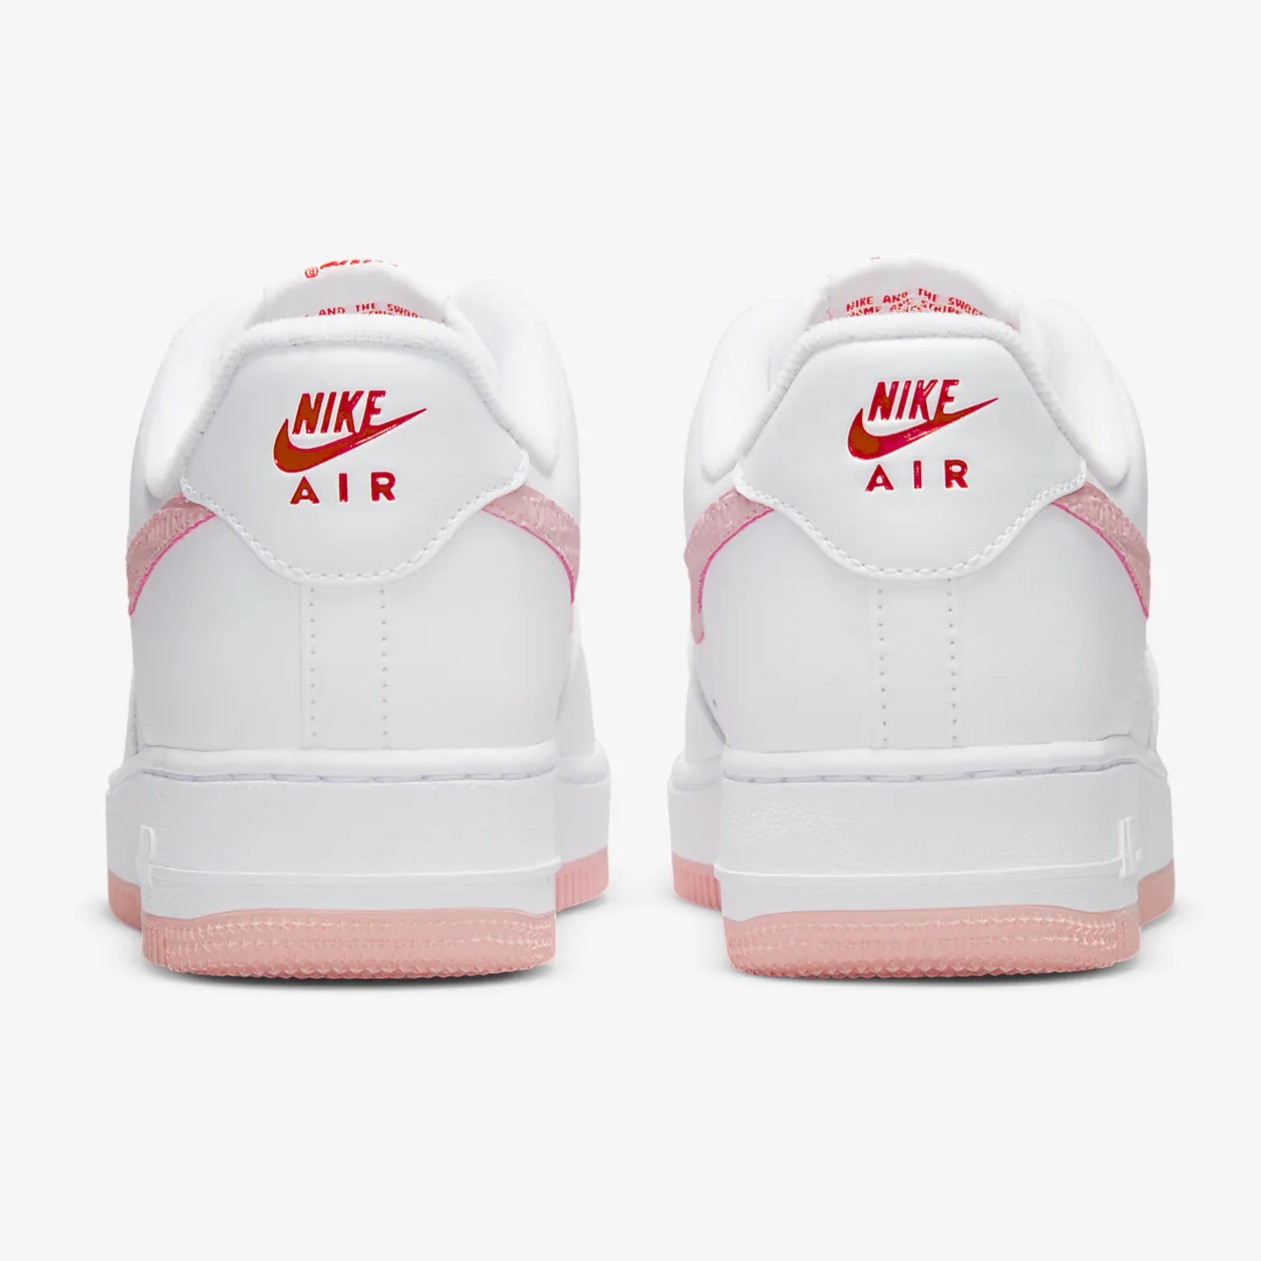 GIÀY NỮ NIKE AIR FORCE 1 07 LOW VD VALENTINE S DAY WHITE ATMOSPHERE UNIVERSITY RED SAIL DQ9320-100 13